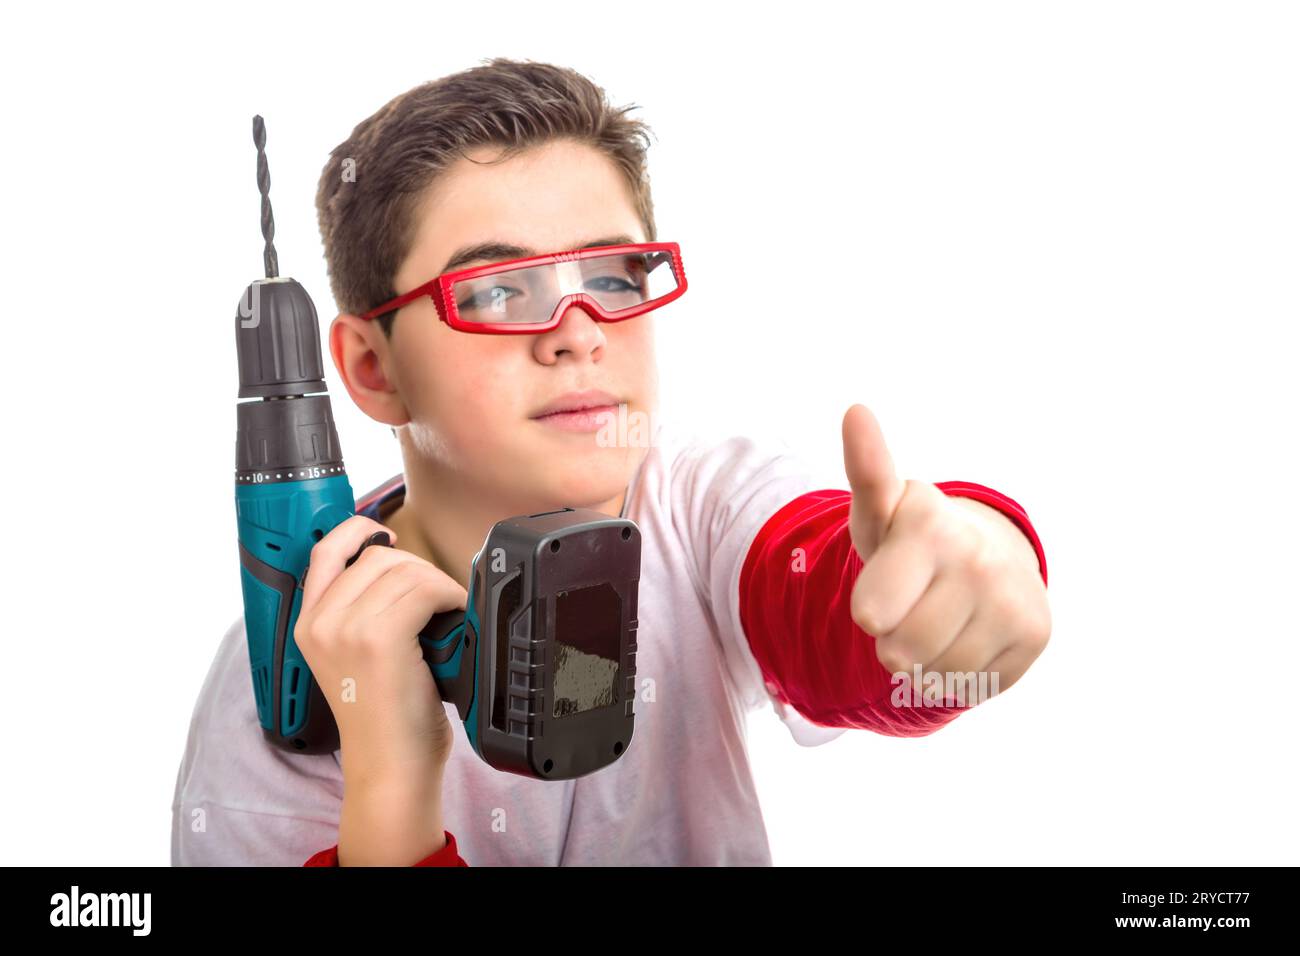 Boy wearing red goggles and holding a cordless drill makes success sign Stock Photo